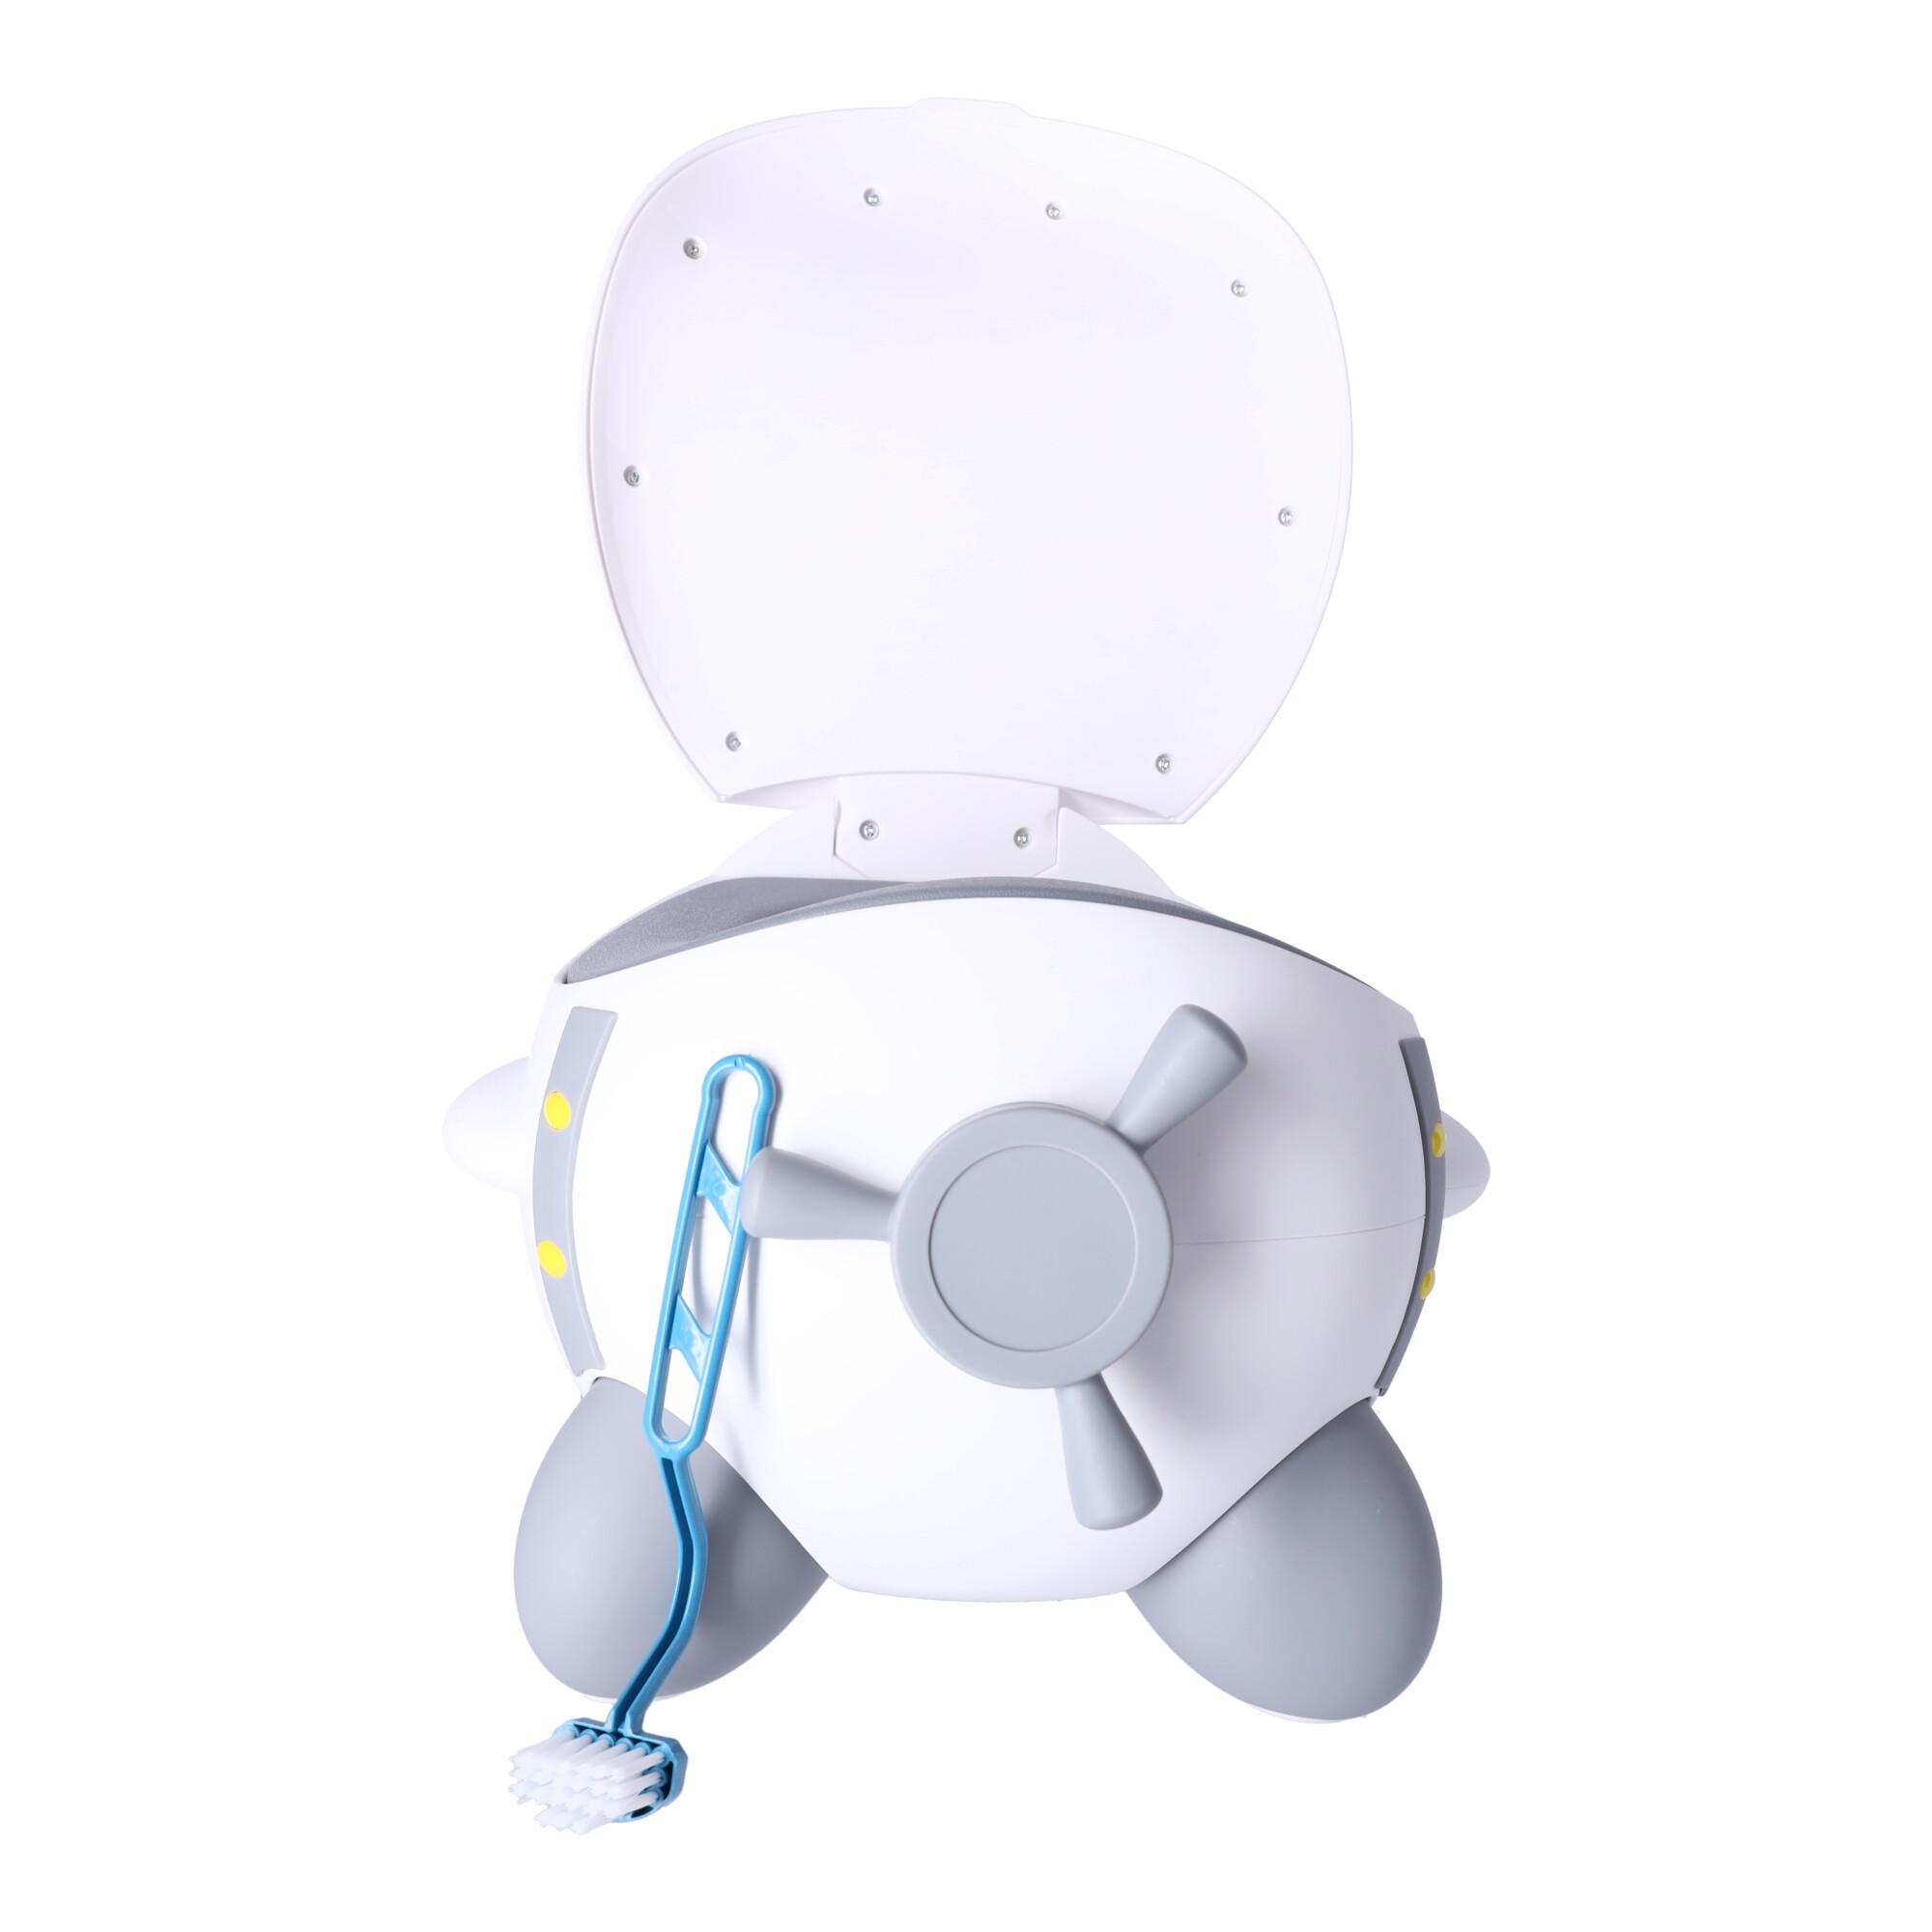 Multifunctional potty for children Airplane - white and gray.